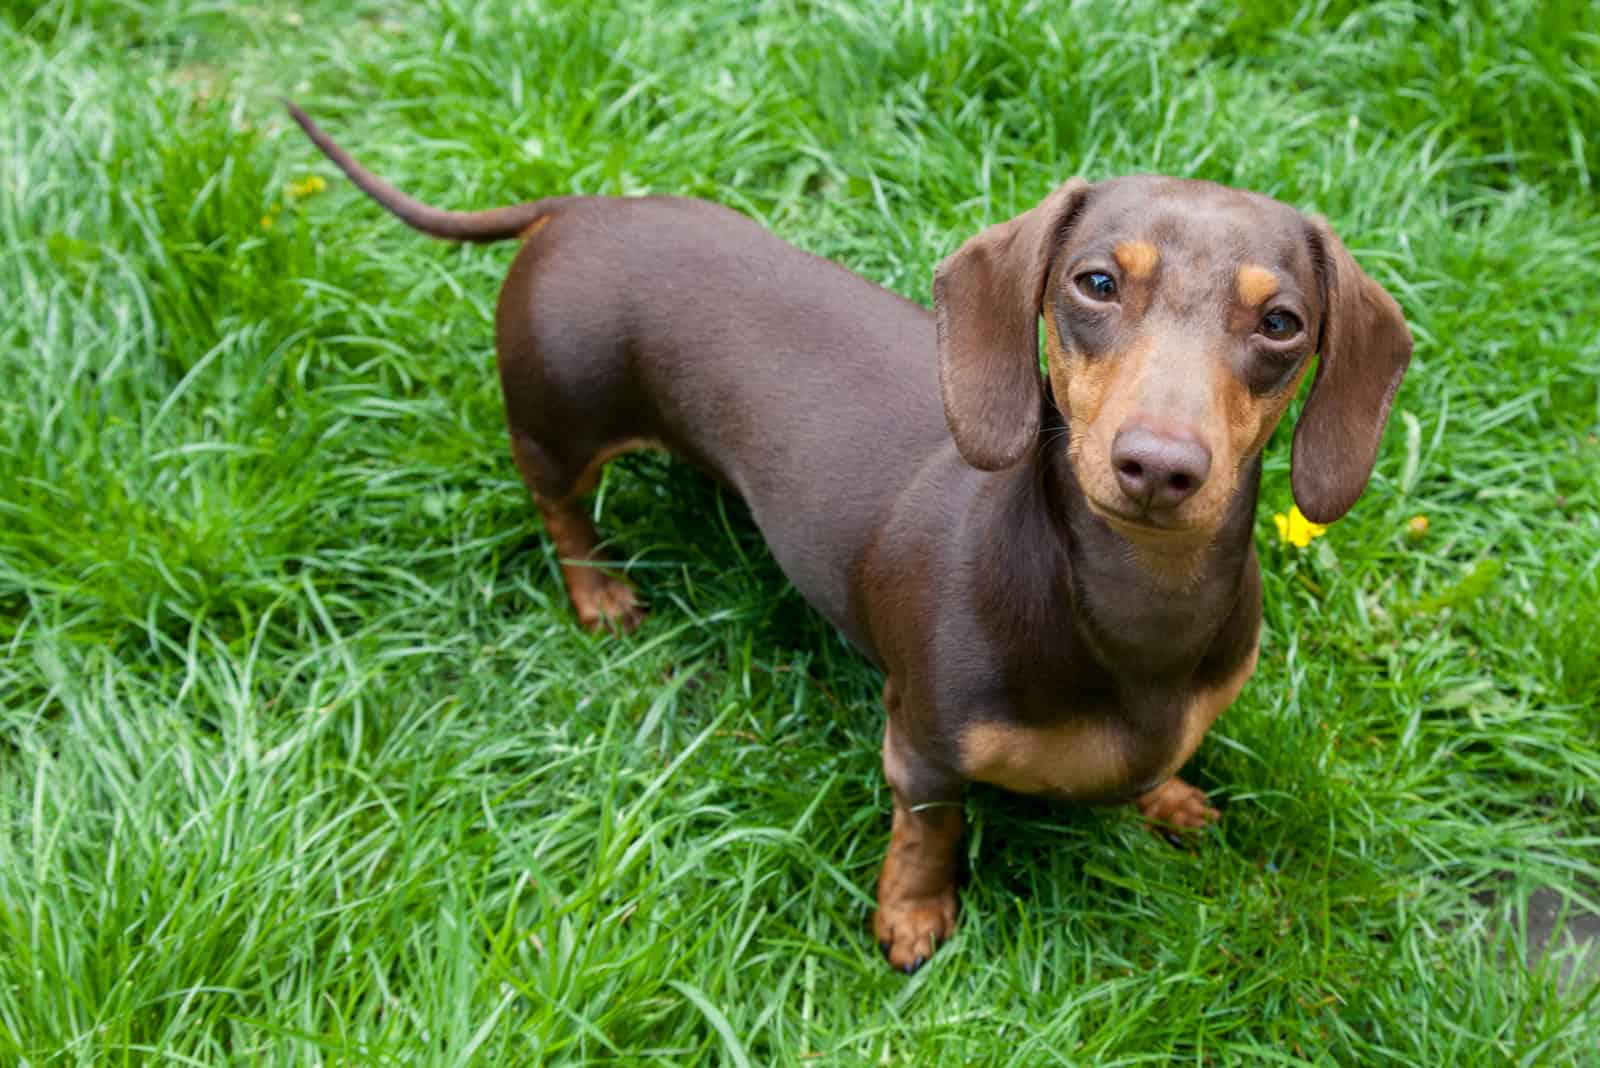 Dachshund is standing on the grass and looking at the camera